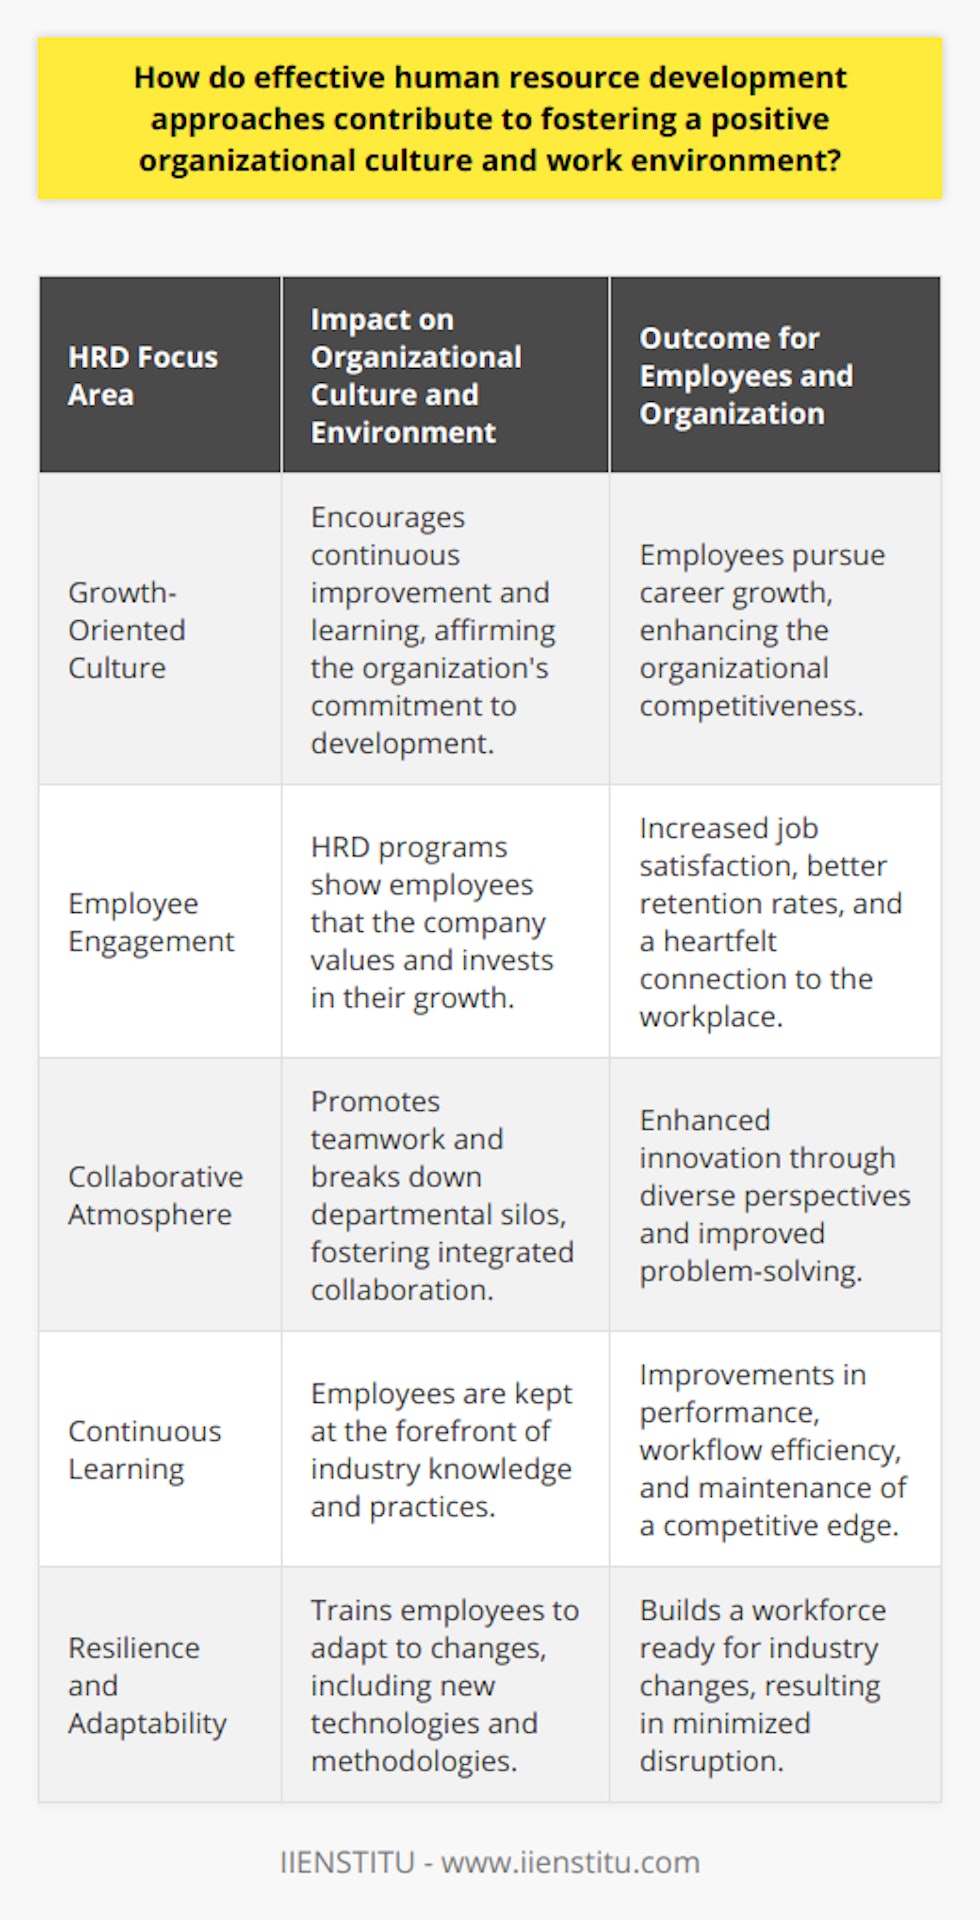 Effective human resource development (HRD) is crucial in shaping an organization's culture and work environment. By investing in employees through tailored development programs, organizations can nurture skills, motivate individuals, and create a sustainable and thriving workplace.**Fostering a Growth-Oriented Organizational Culture**Organizations that prioritize HRD demonstrate a commitment to growth, both at an individual and corporate level. This commitment fosters a culture where continuous improvement is the norm. Employees feel supported in pursuing their career aspirations, and as a result, they engage more fully with their work. A culture of learning becomes ingrained, with employees often taking the initiative to seek out further development opportunities, which in turn maintains the organization's competitive edge.**Enhancing Employee Engagement and Satisfaction**When employees see that their employer invests in their development, they often report higher job satisfaction. This can manifest in the form of better retention rates and lower turnover, as employees feel a deeper connection to their workplace. Furthermore, with enhanced training, employees can tackle a broader range of tasks more effectively, which increases overall job satisfaction as they feel more competent and able to contribute meaningfully to the organization's goals.**Encouraging a Collaborative Work Atmosphere**HRD approaches that emphasize teamwork and collaborative learning can break down silos within an organization. This often leads to a more integrated workforce where cross-departmental cooperation is common. A collaborative atmosphere helps to foster innovative thinking as diverse perspectives come together to solve complex problems.**Improving Performance through Continuous Learning**Organizations that excel in HRD often see marked improvements in performance. This is because employees are not only equipped with the latest knowledge and skills but are also encouraged to apply them in ways that drive business results. Regular development checks ensure that employees remain at the forefront of industry practices, which optimizes workflow efficiency and enhances the organization's competitive advantage.**Building Resilience and Adaptability**In today's ever-changing business landscape, the resilience of an organization's workforce is of paramount importance. Effective HRD strategies often include elements that improve employees' adaptability to change. This can involve training in new technologies, methodologies, or mindsets that help employees to pivot quickly in response to industry shifts. A culture that is adaptive and resilient is less likely to be disrupted by unforeseen challenges.**Conclusion**In sum, effective HRD is a key driver behind a flourishing organizational culture and work environment. It creates an ecosystem of growth, satisfaction, and resilience that benefits both the employees and the organization. It lays down the foundation for an engaged, knowledgeable, and flexible workforce, prepared to meet future challenges head-on. Organizations like IIENSTITU that recognize the importance of comprehensive human resource development are poised to excel and maintain relevance in a rapidly evolving global market. Through intentional HRD strategies, organizations can harness the full potential of their human capital and chart a course towards sustained success.